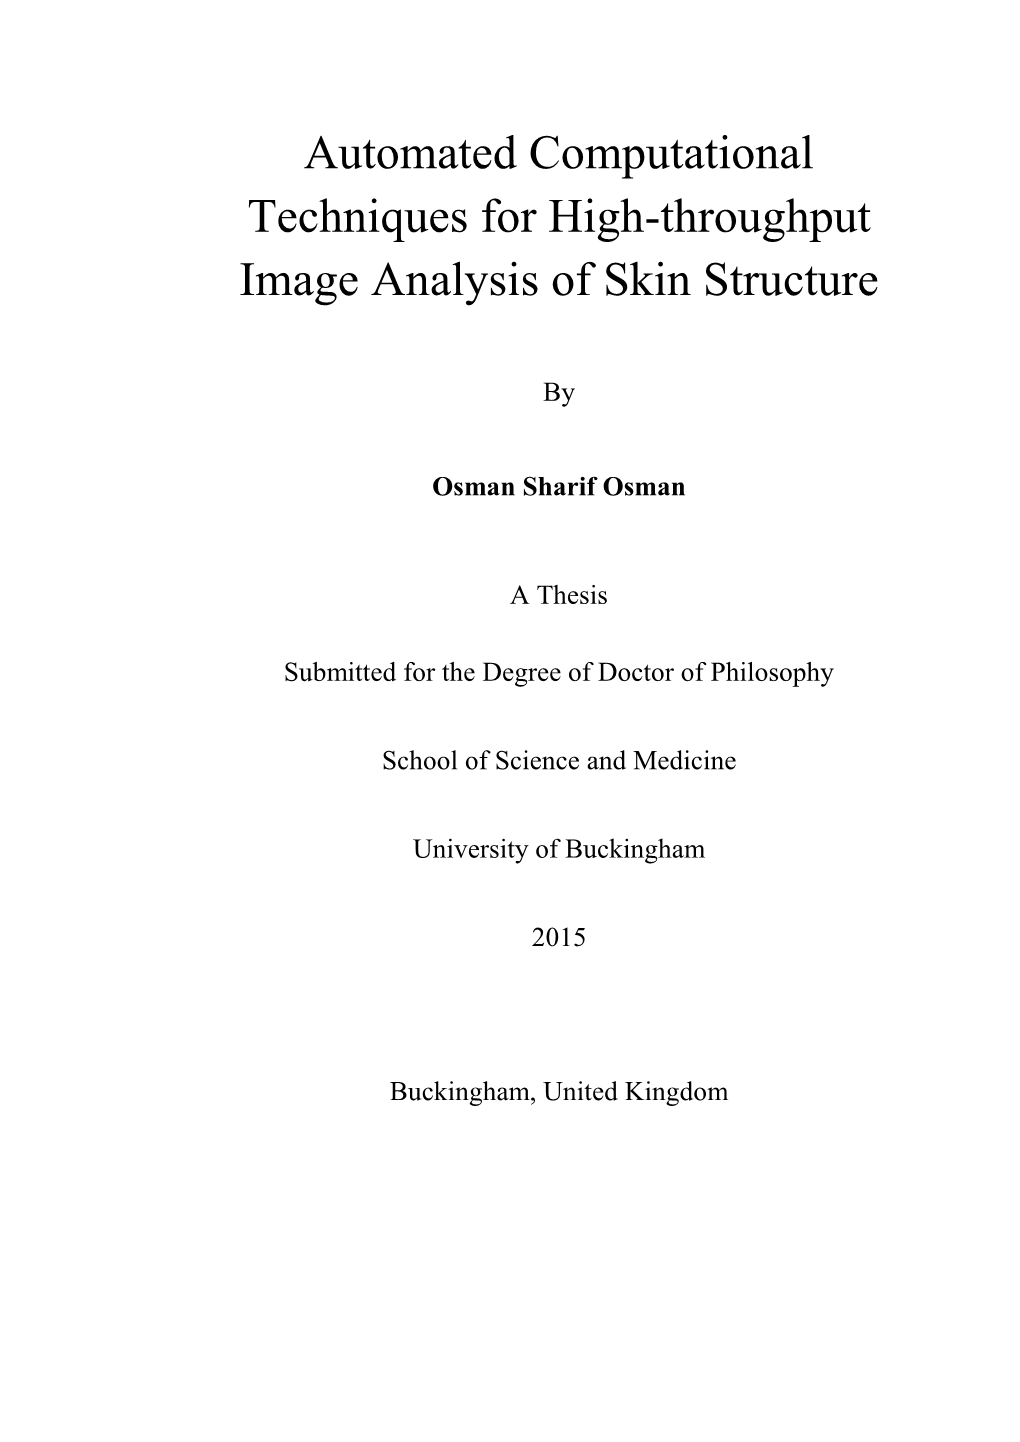 Automated Computational Techniques for High-Throughput Image Analysis of Skin Structure